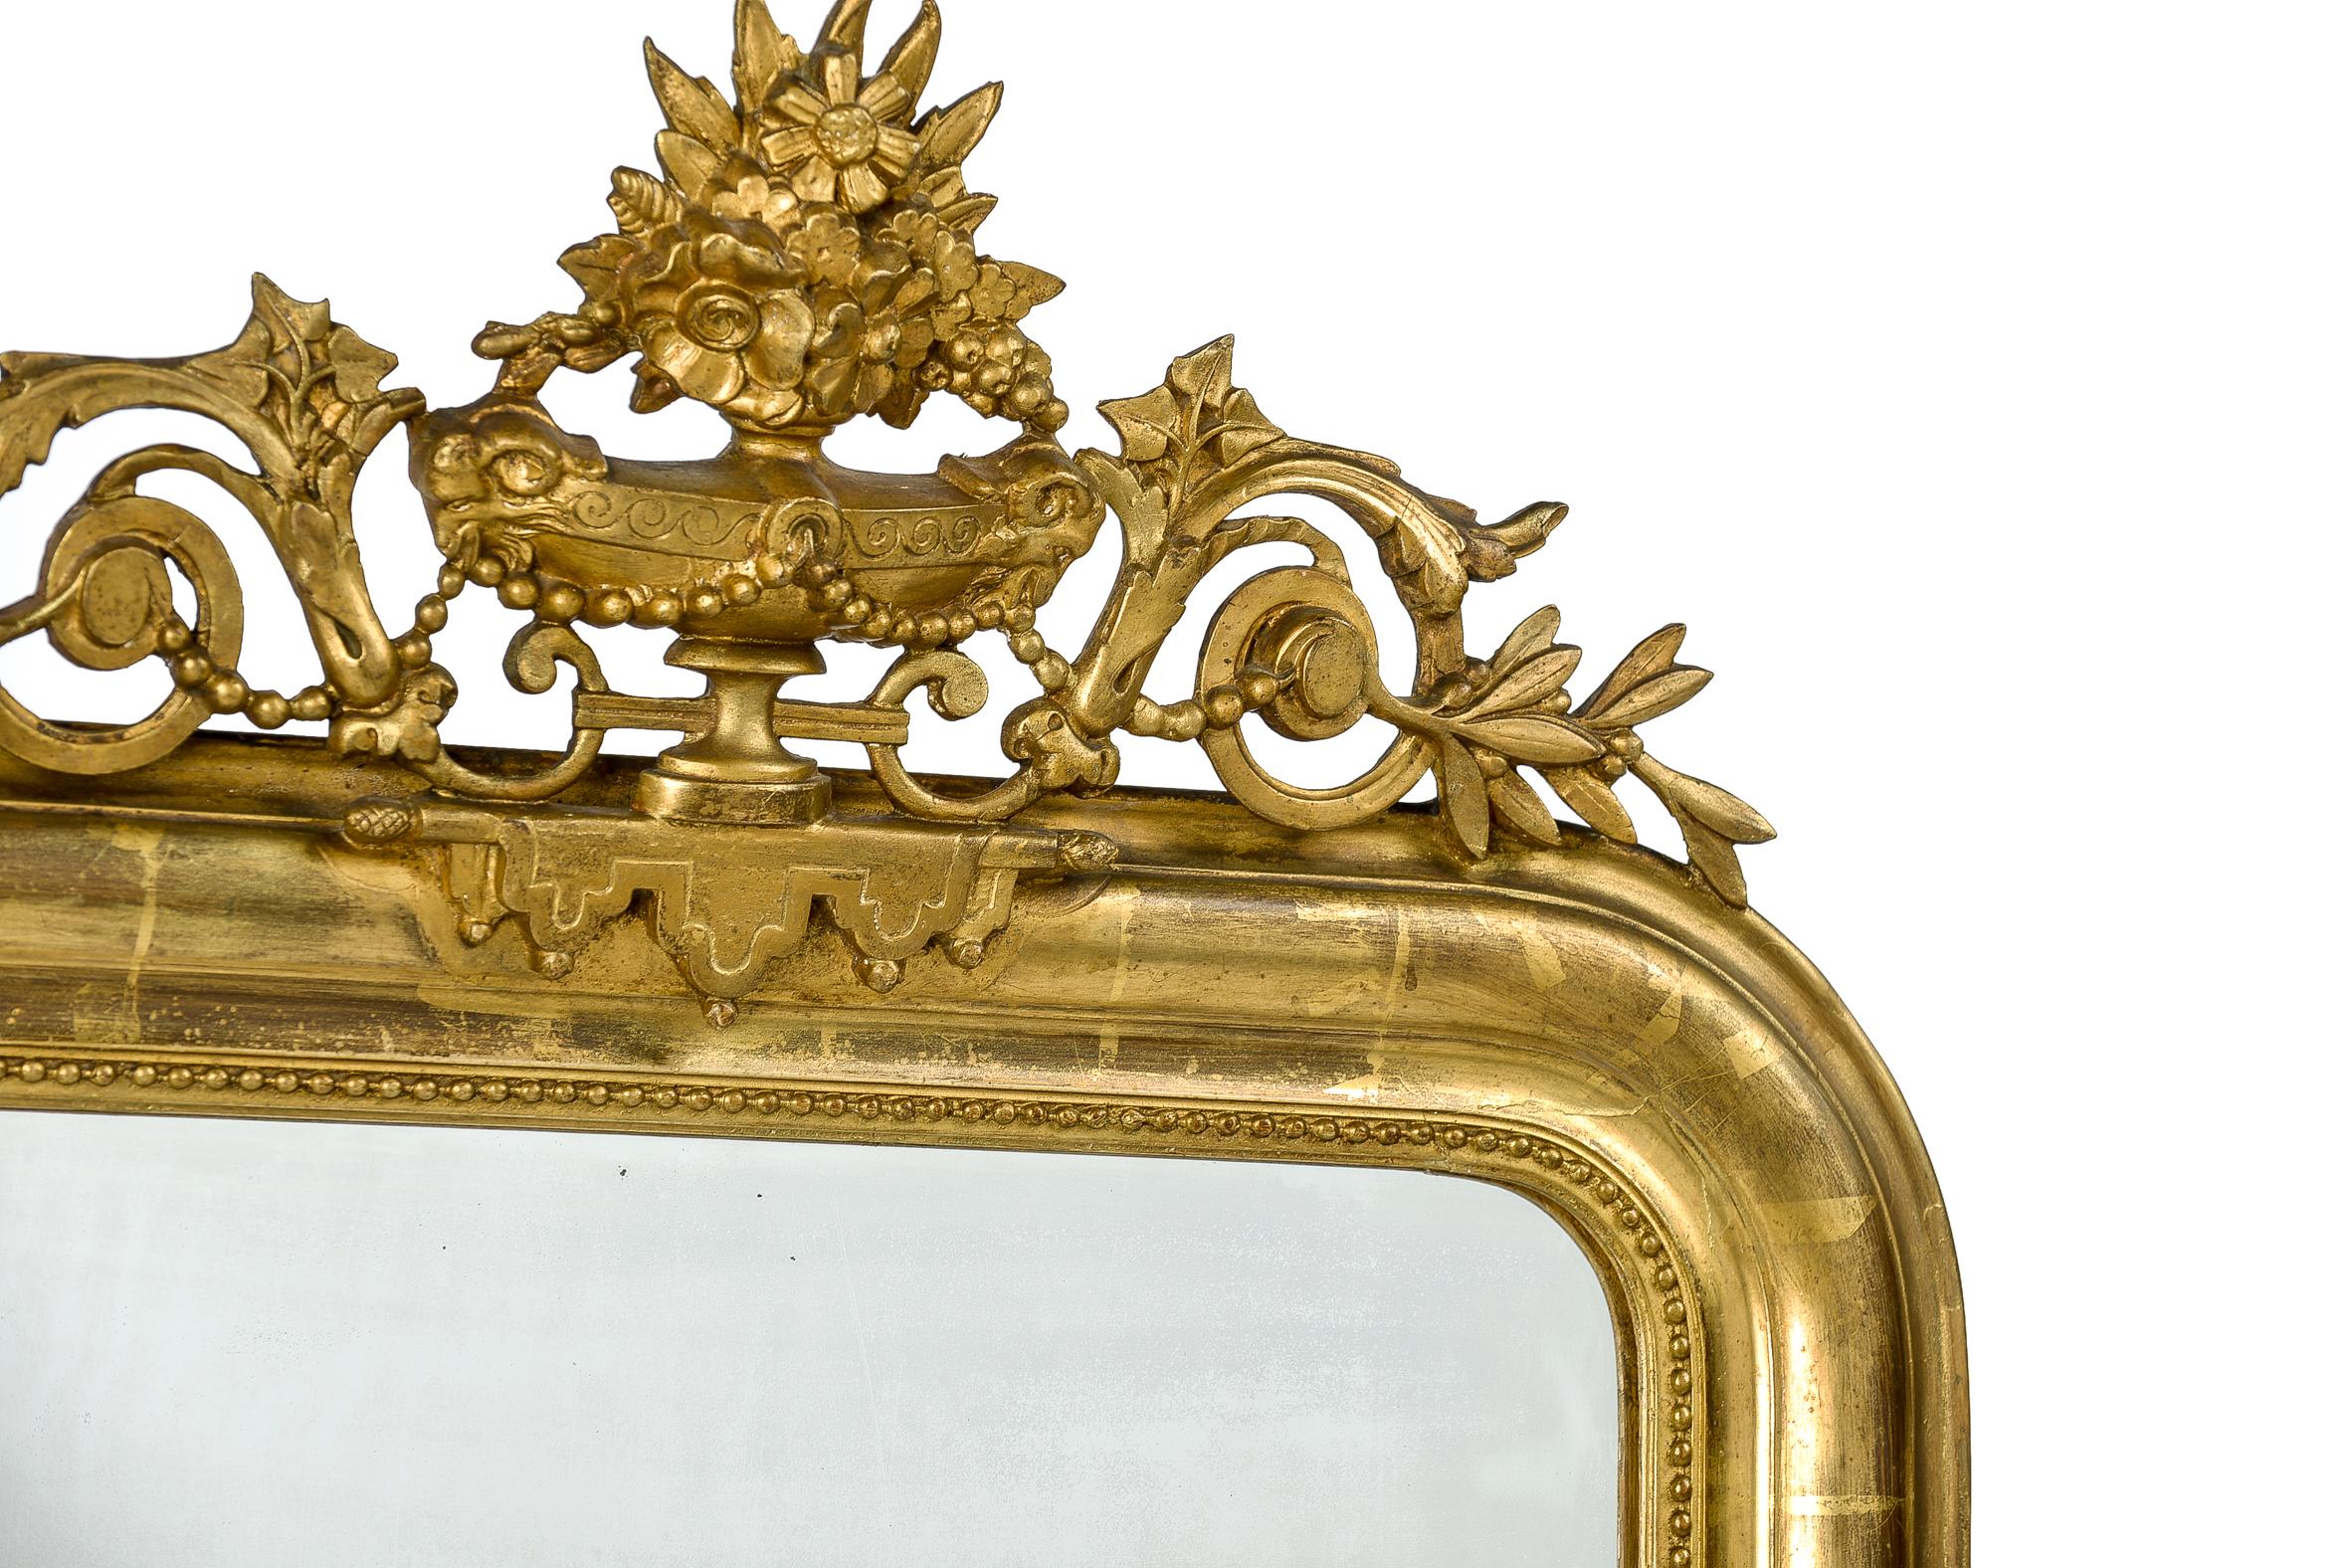 This beautiful antique mirror was made in France around 1880. It is a pure Louis Philippe mirror with its upper rounded corners and elegant frame. The most elevated part of the frame has a floral engraving on both sides and a classic pearl beading